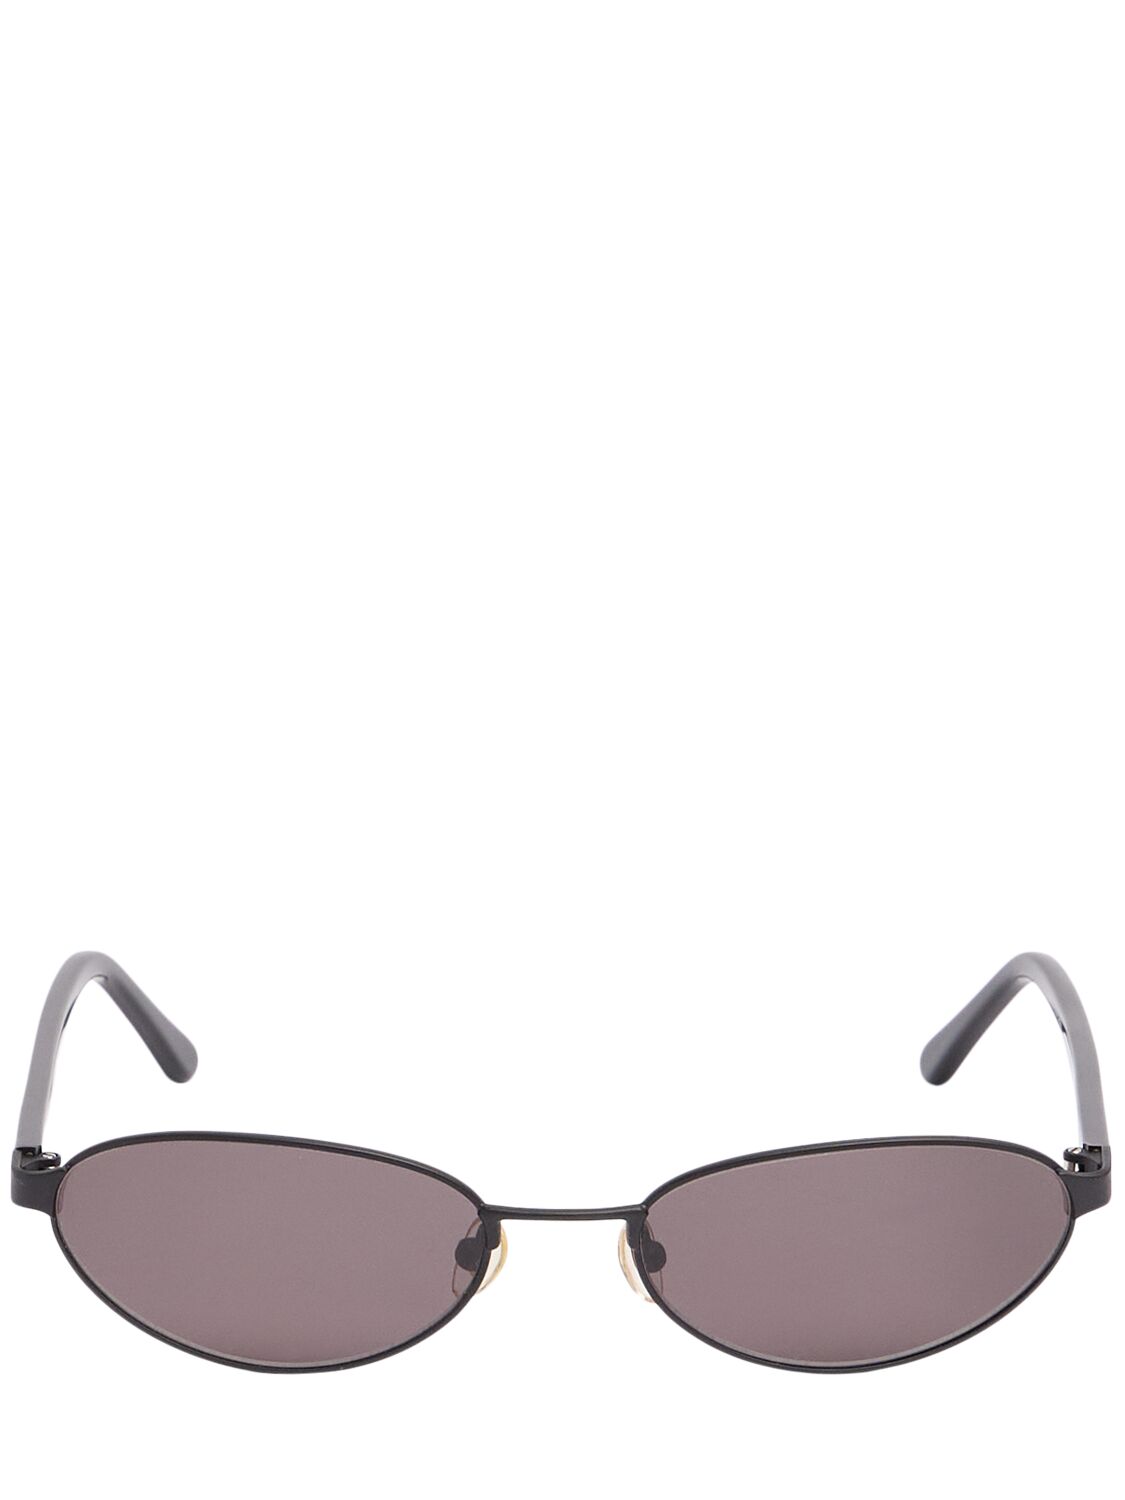 Velvet Canyon Musettes Oval Metal Sunglasses In Gray